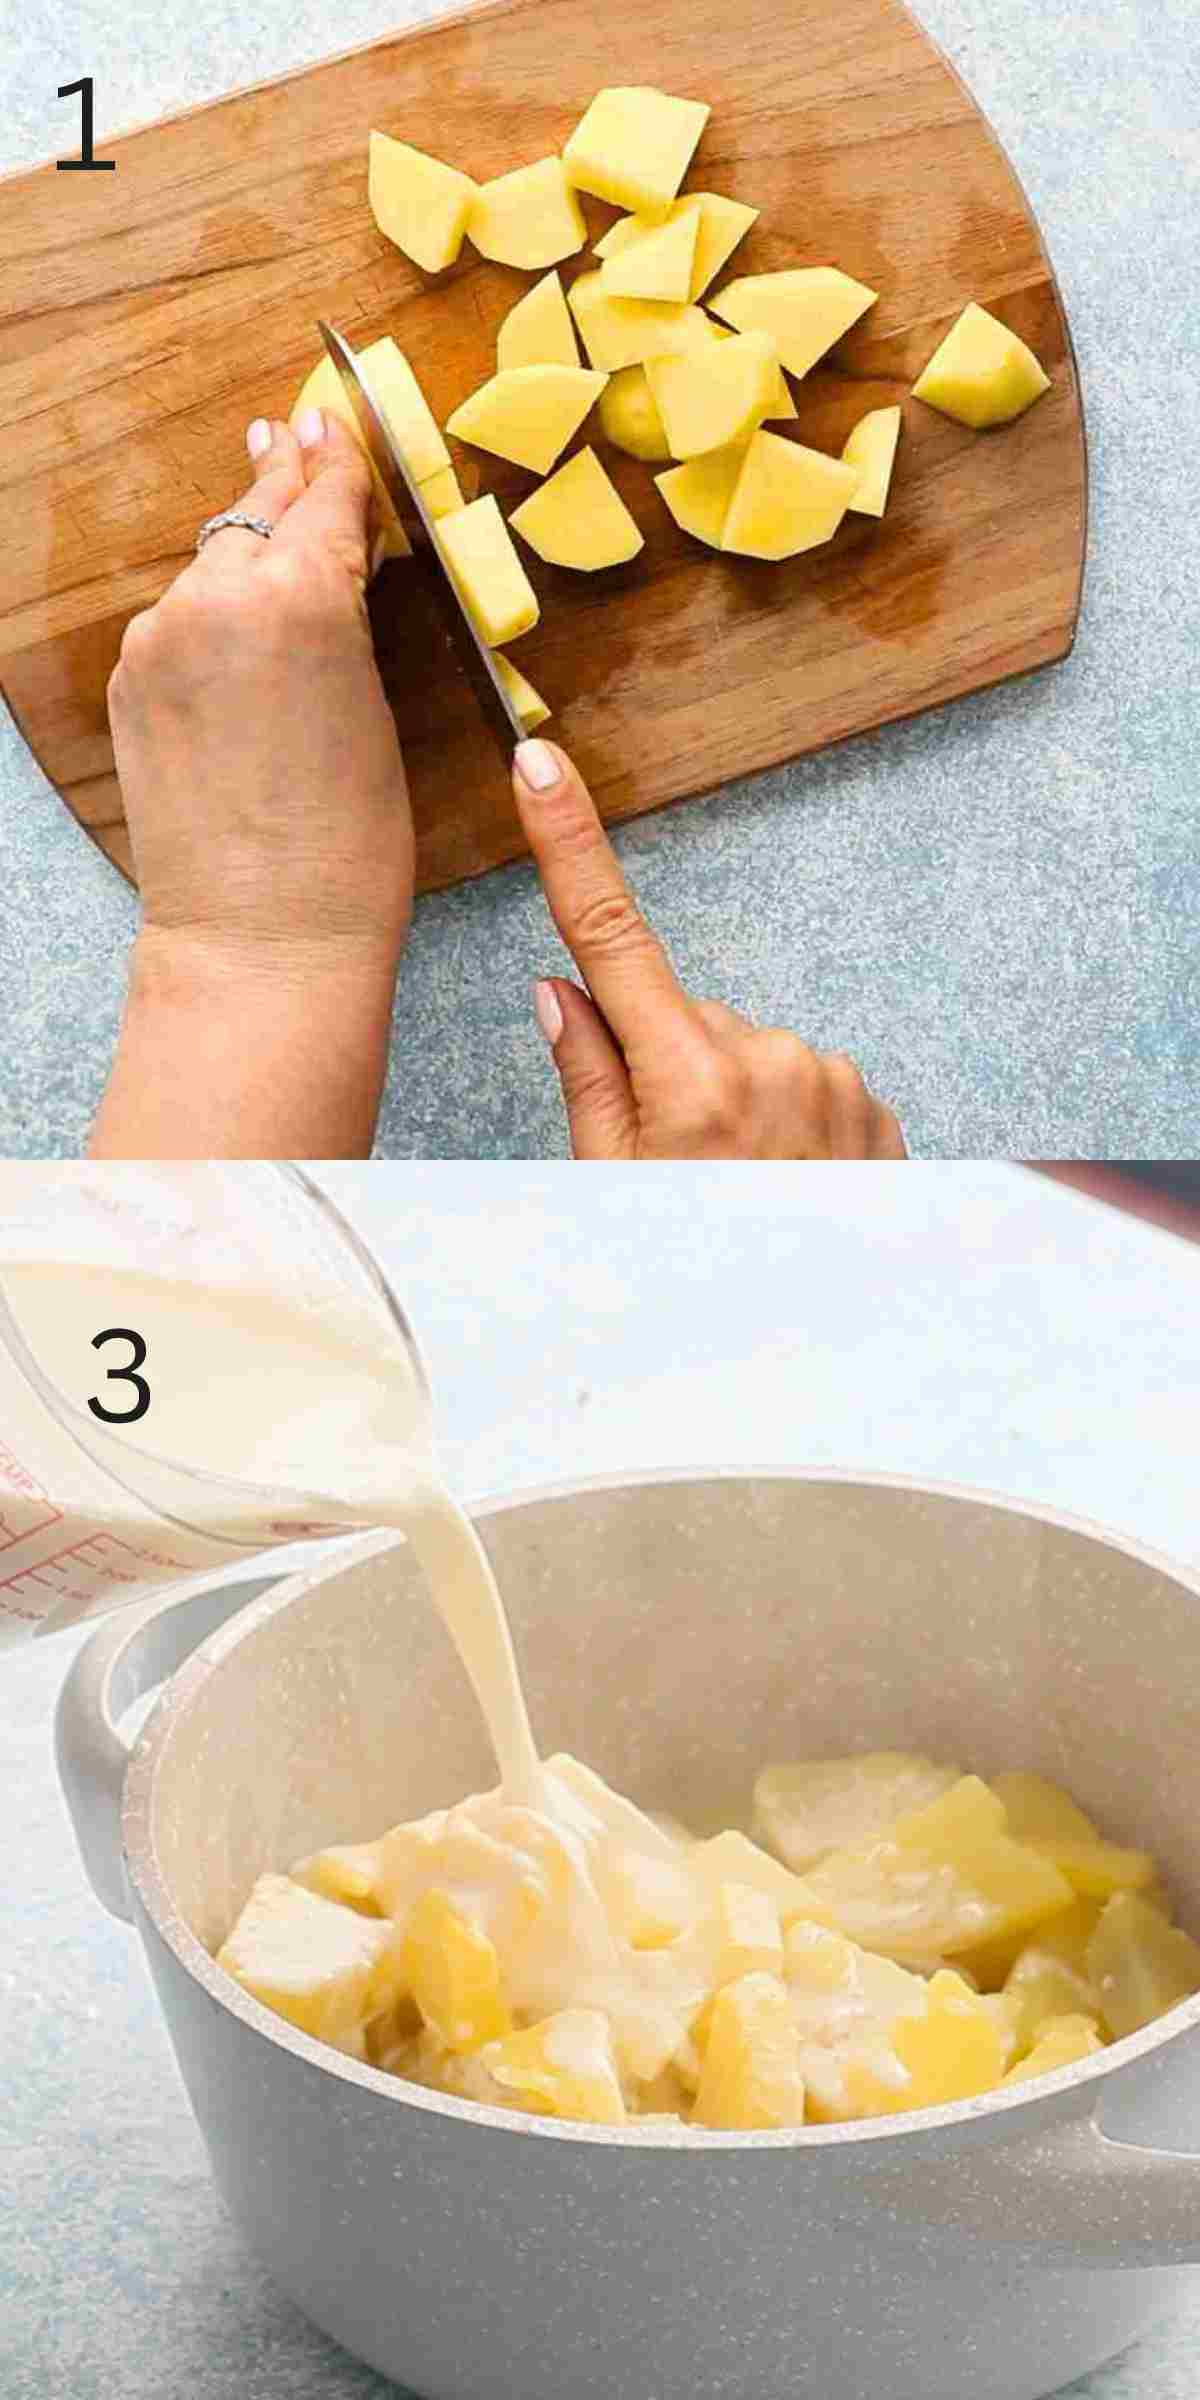 2 photo collage of a hand cutting potatoes and pouring milk into the pot.